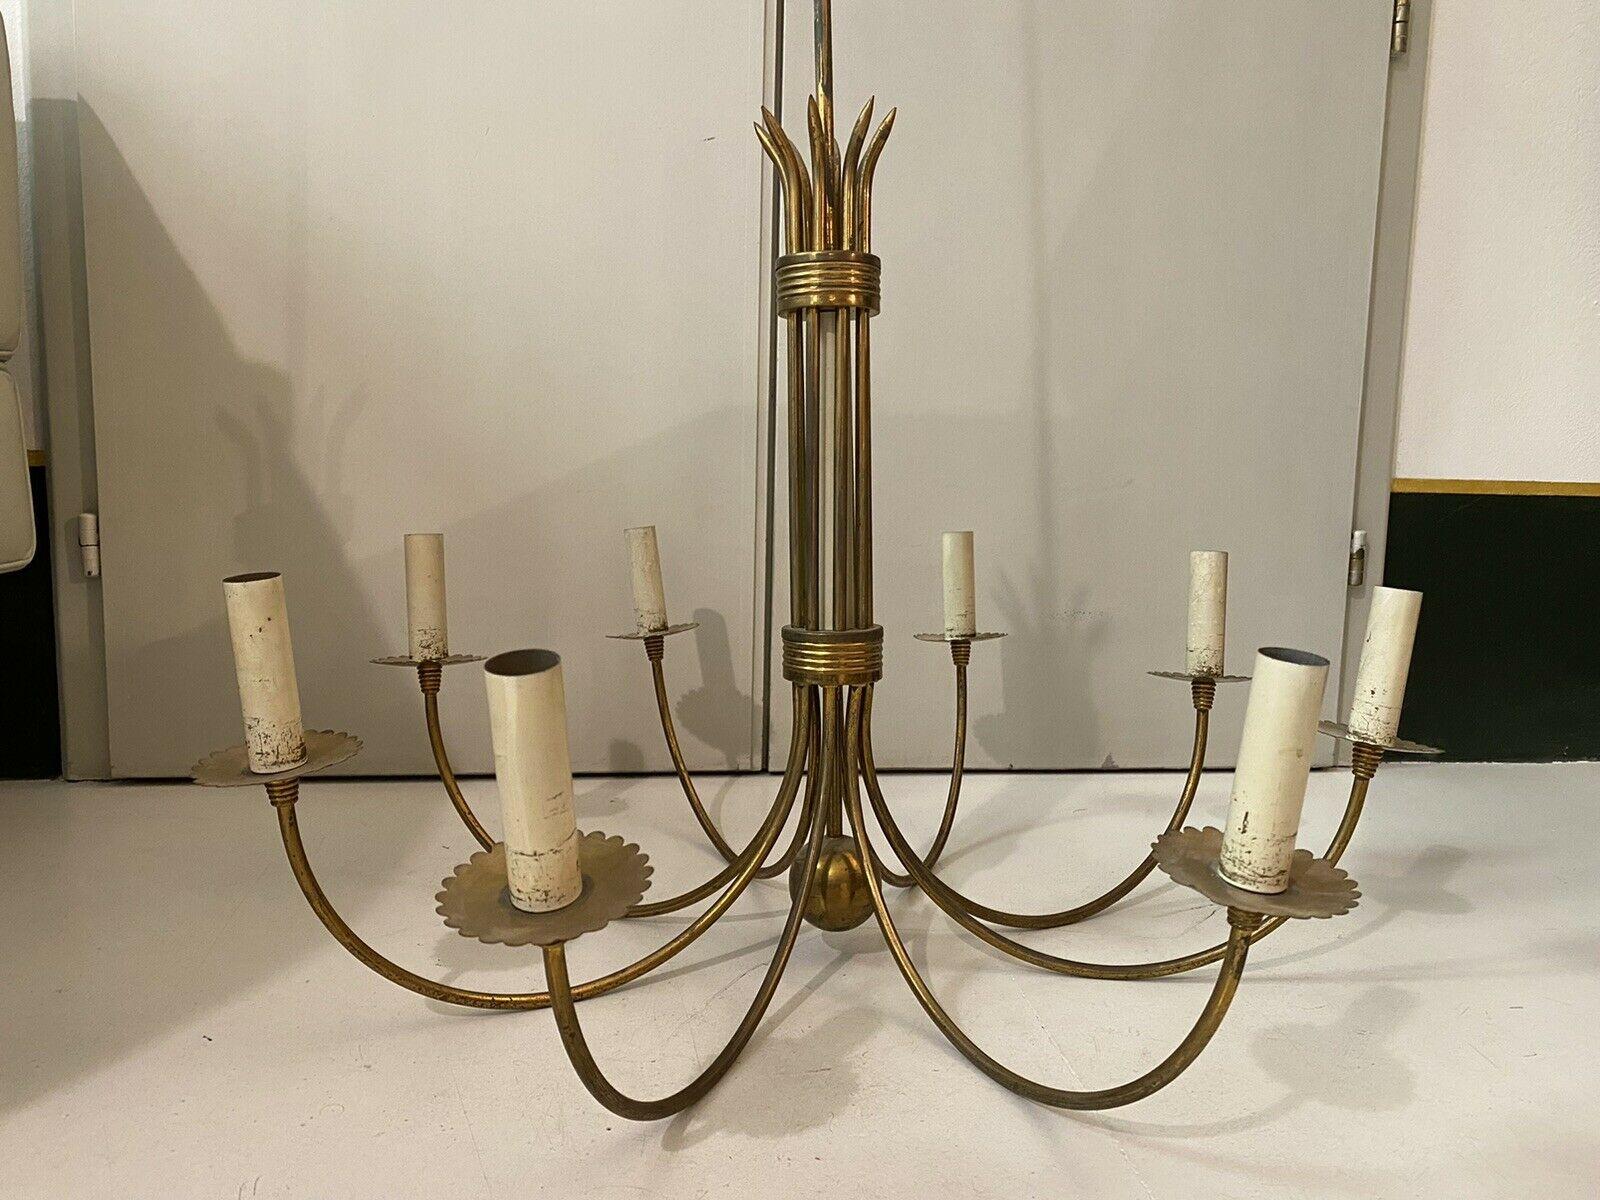 Italian Mid-Century Chandelier Attributed to Guglielmo Ulrich, 1945s For Sale 9